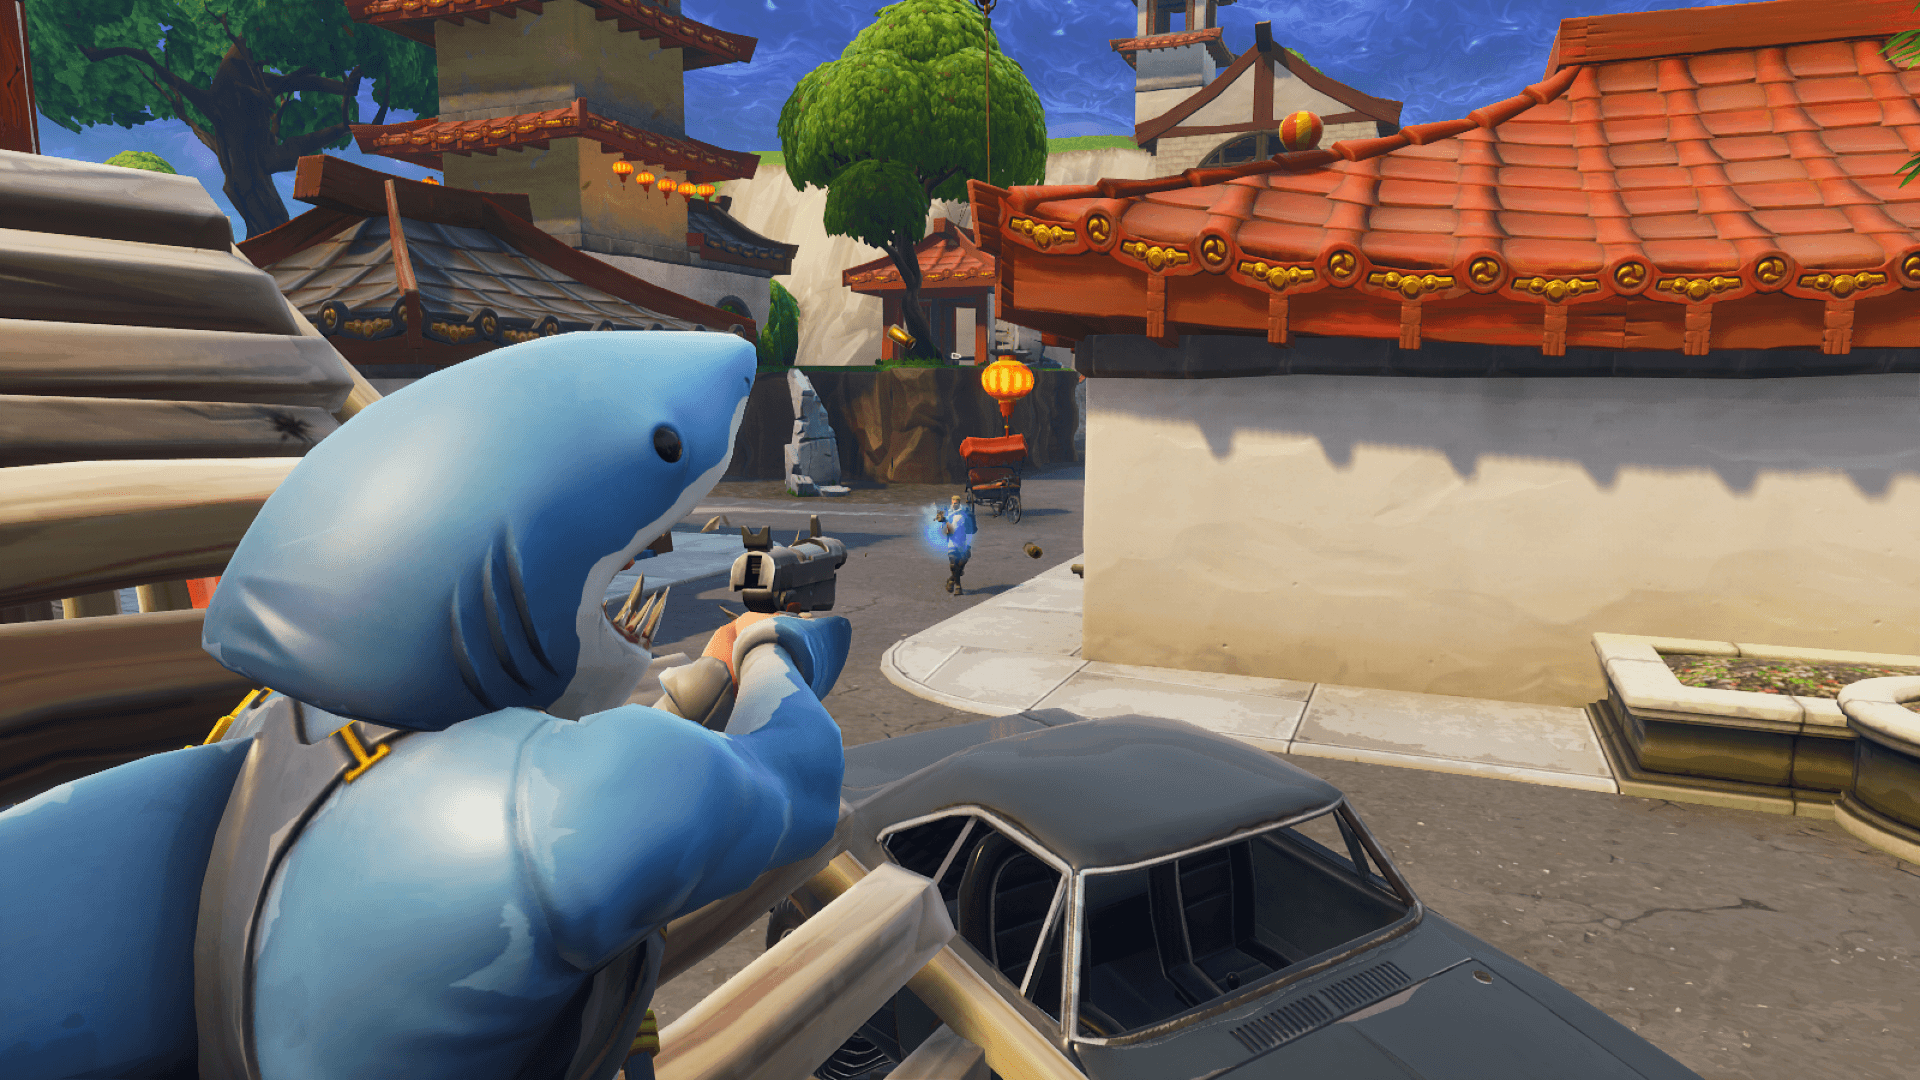 Chomp Sr. is no different than Rex or Tricera Ops, so why the hate